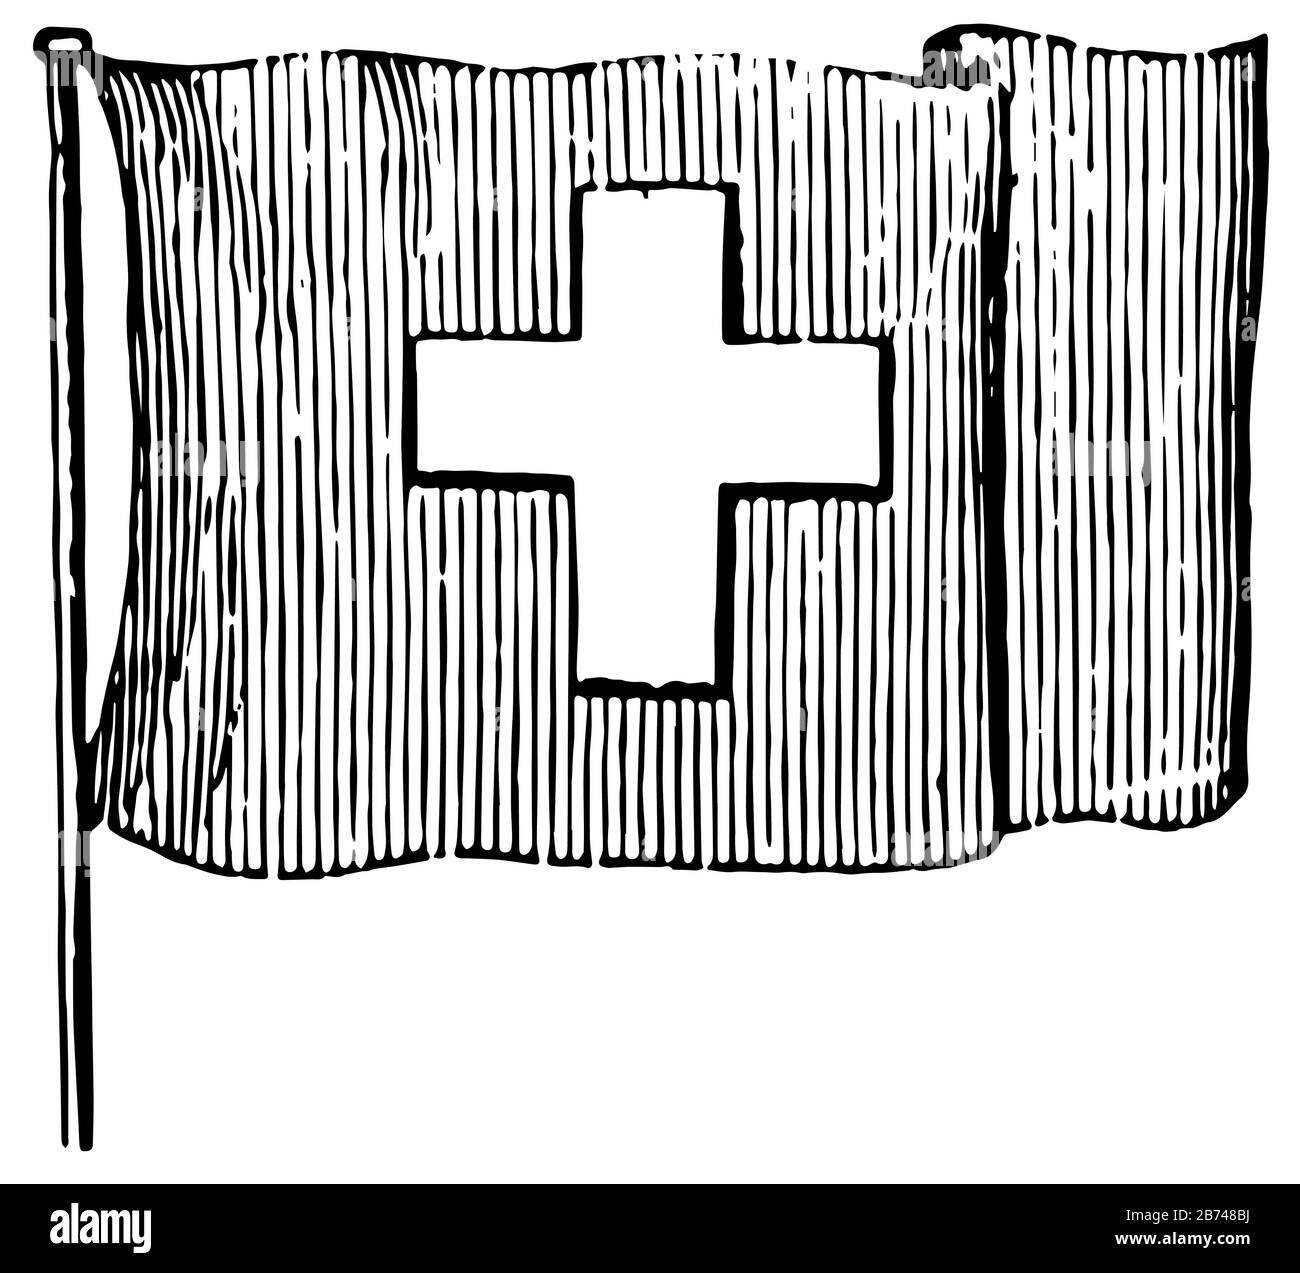 Flag of Switzerland, 1881, this flag has white cross in the center of flag and vertical stripes all over the flag, vintage line drawing or engraving i Stock Vector